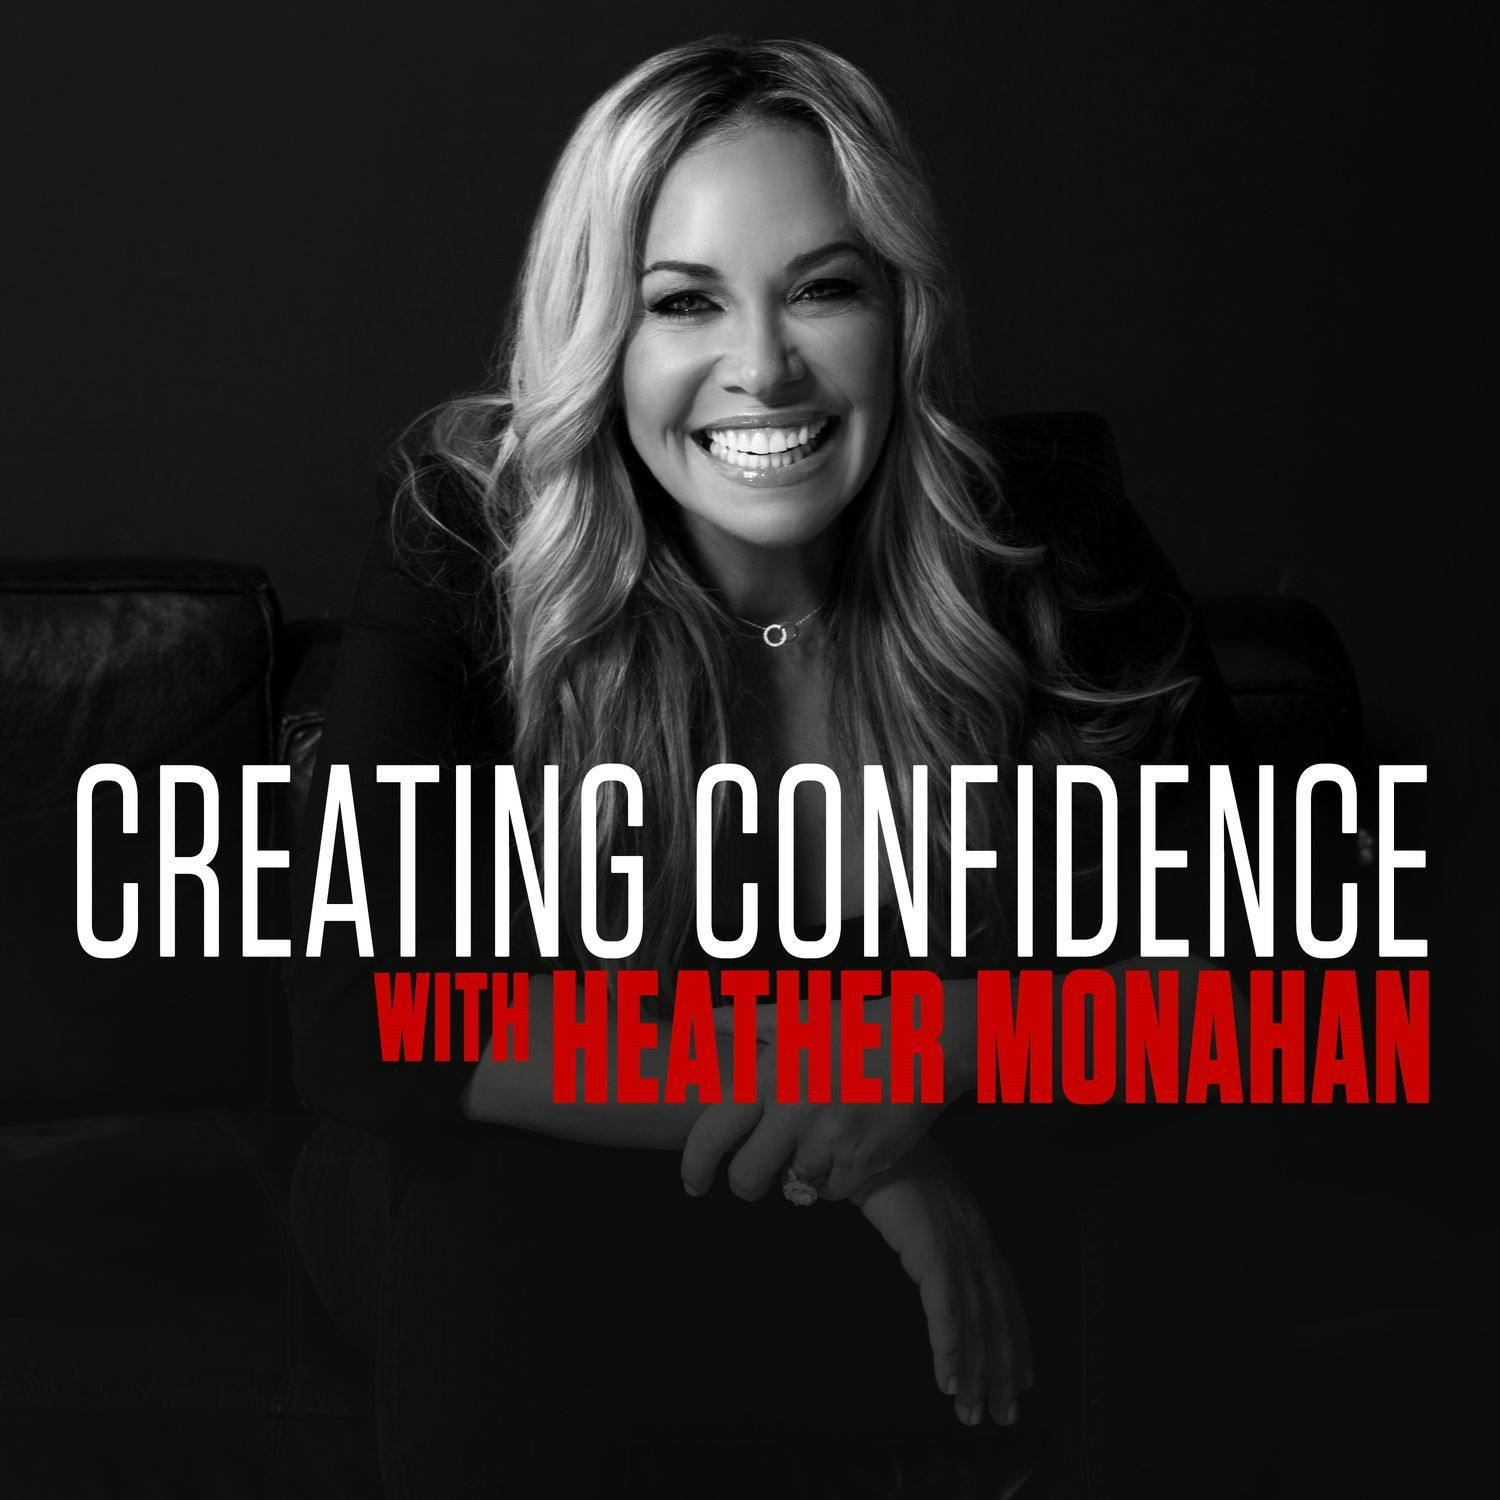 #204: OWN Your Power, With Heather! by Heather Monahan | YAP Media Network